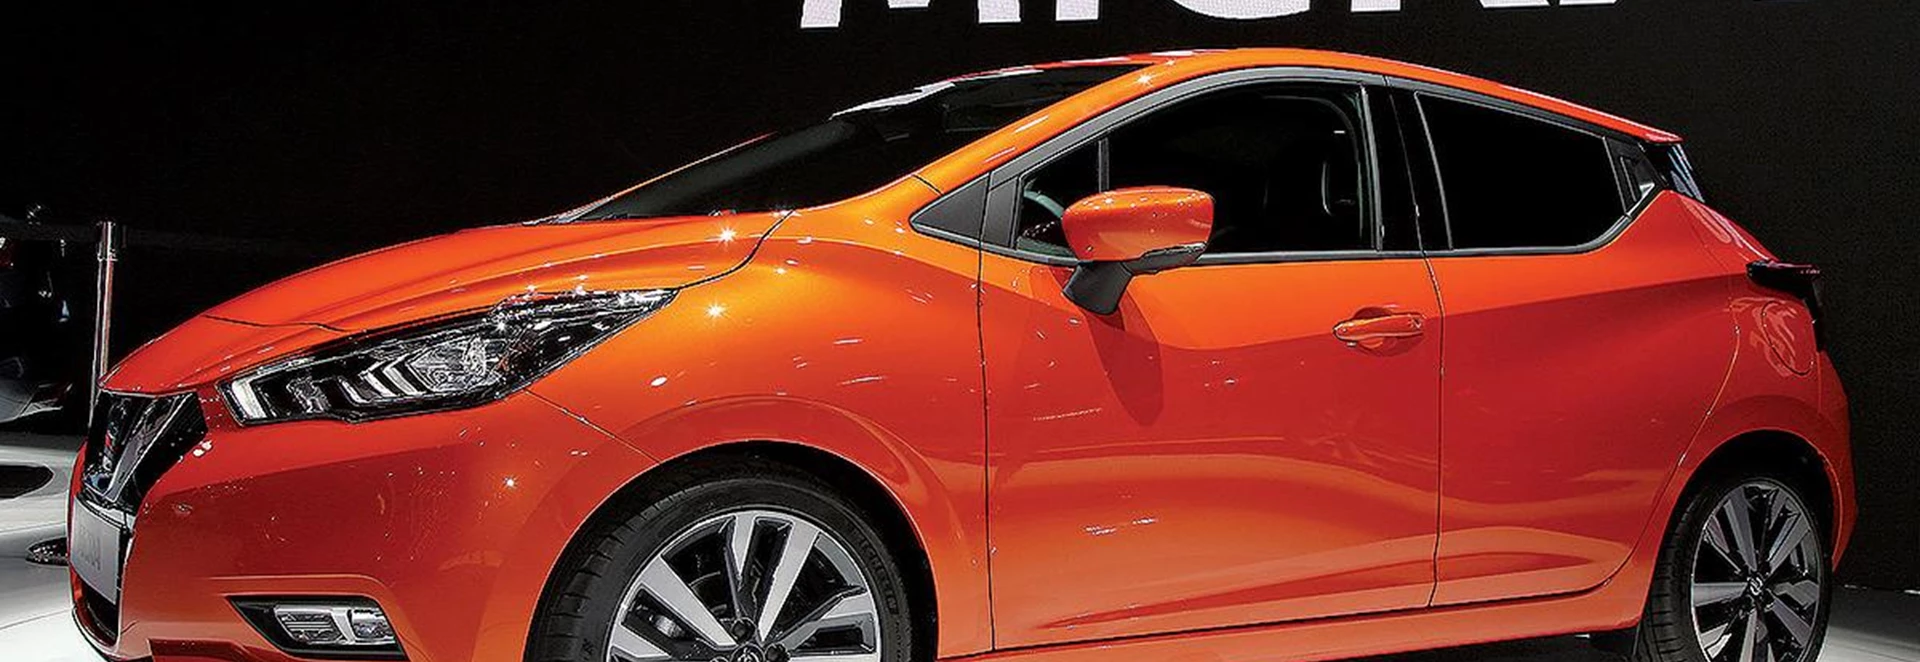 Nissan Note to be axed in 2017 when new Micra launches